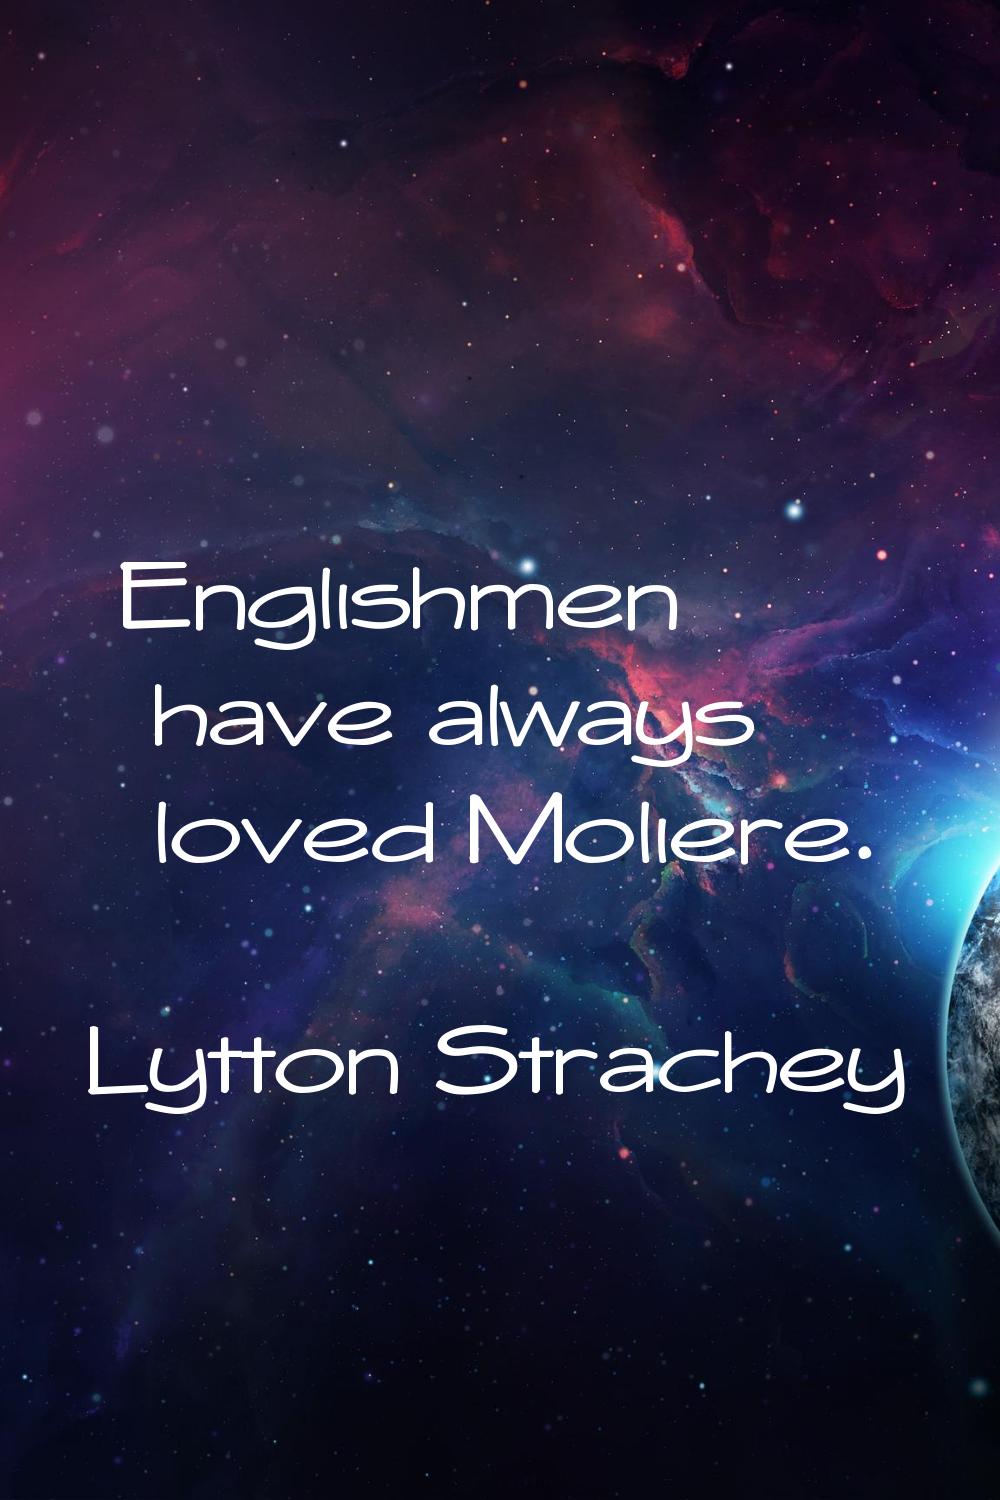 Englishmen have always loved Moliere.